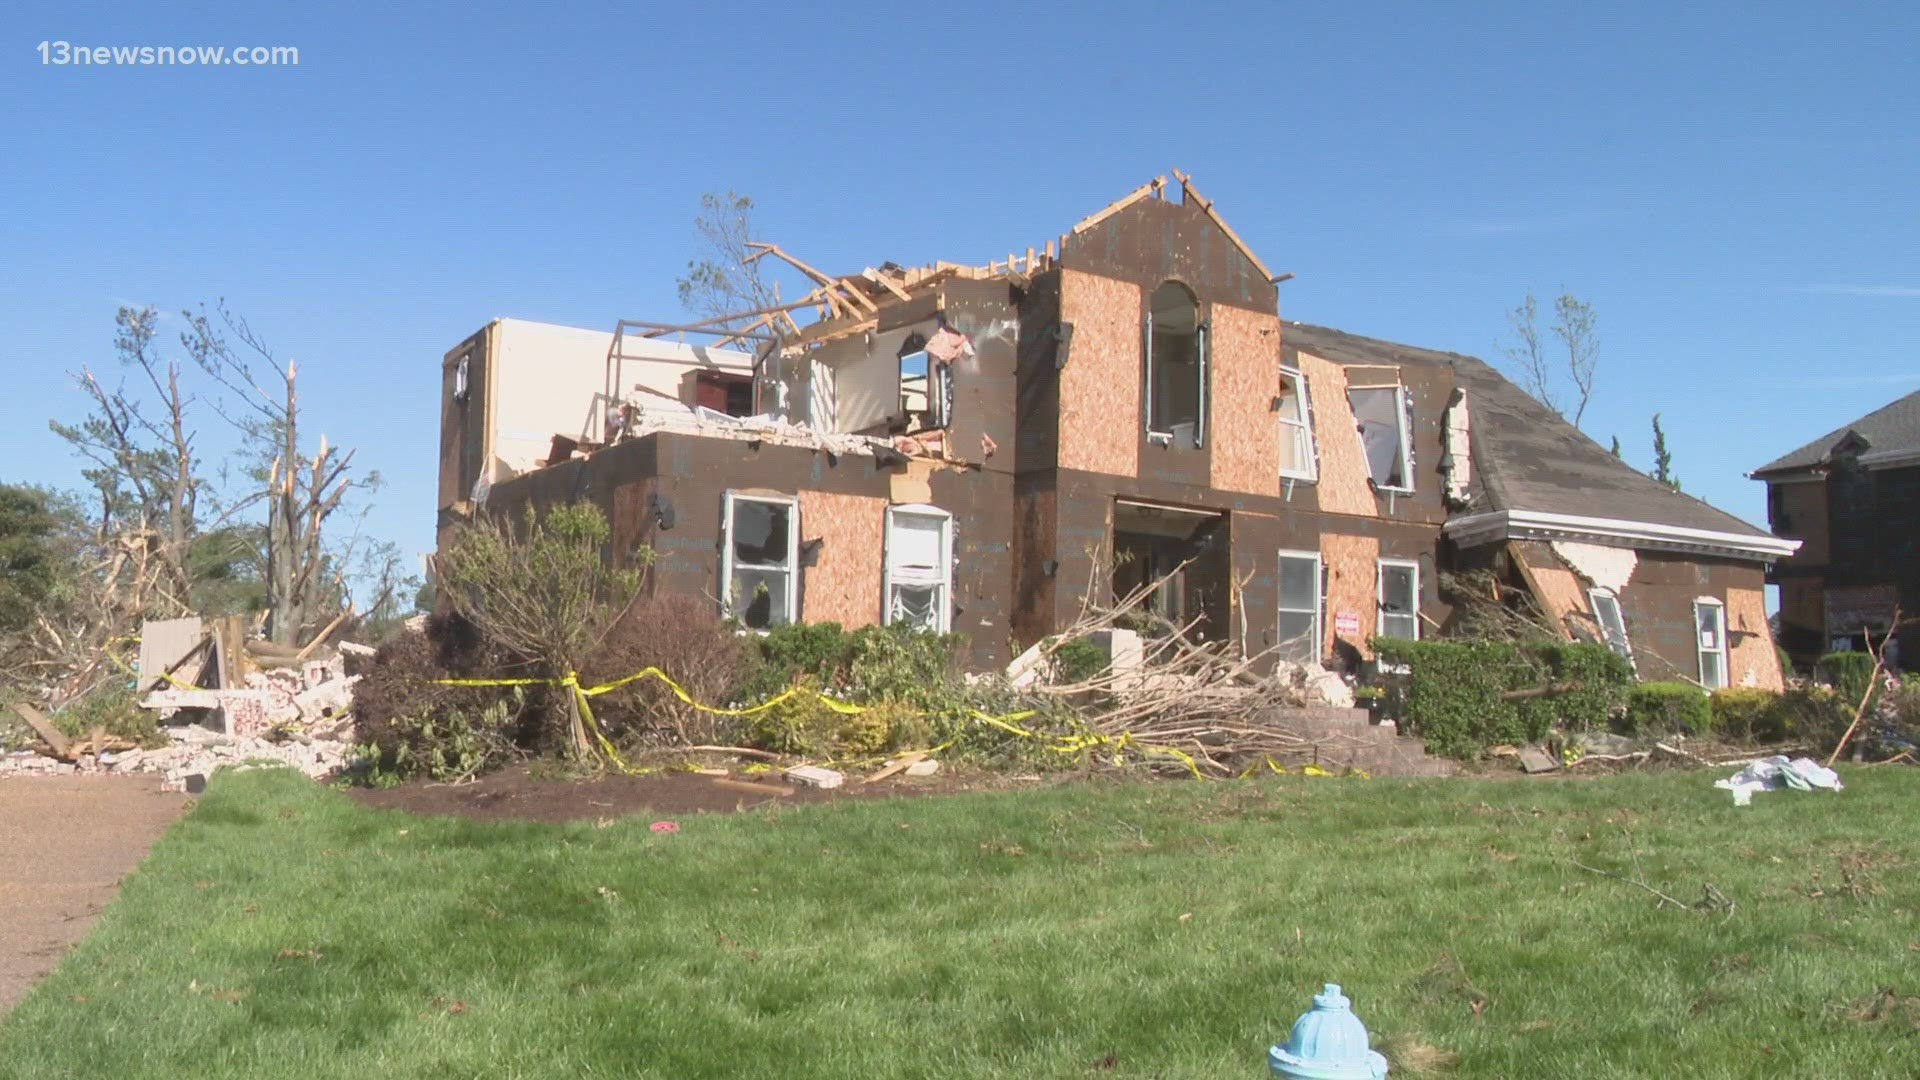 Days after a powerful EF-3 twister ripped through the area, cleanup efforts are making a dent.